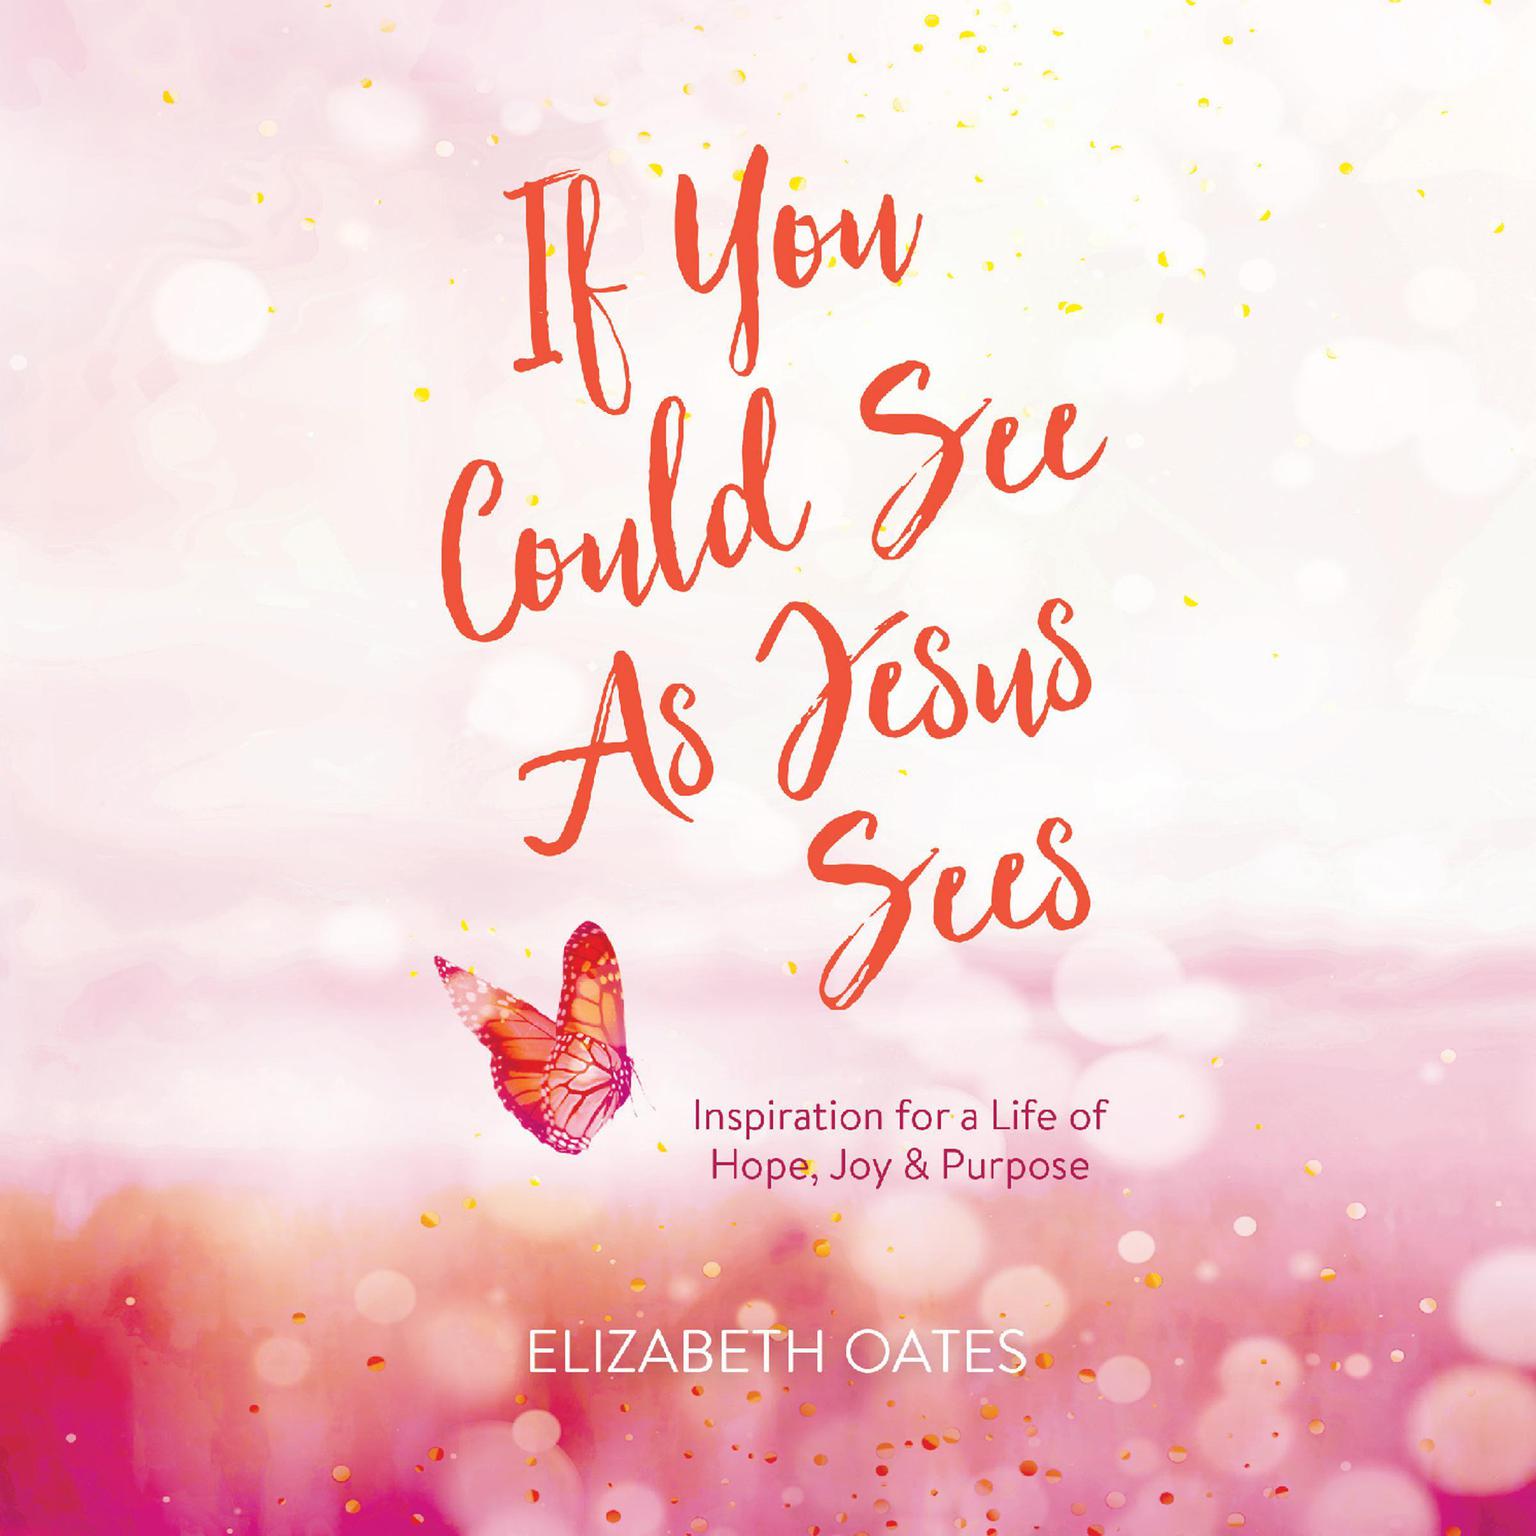 If You Could See as Jesus Sees: Inspiration for a Life of Hope, Joy, and Purpose Audiobook, by Elizabeth Oates